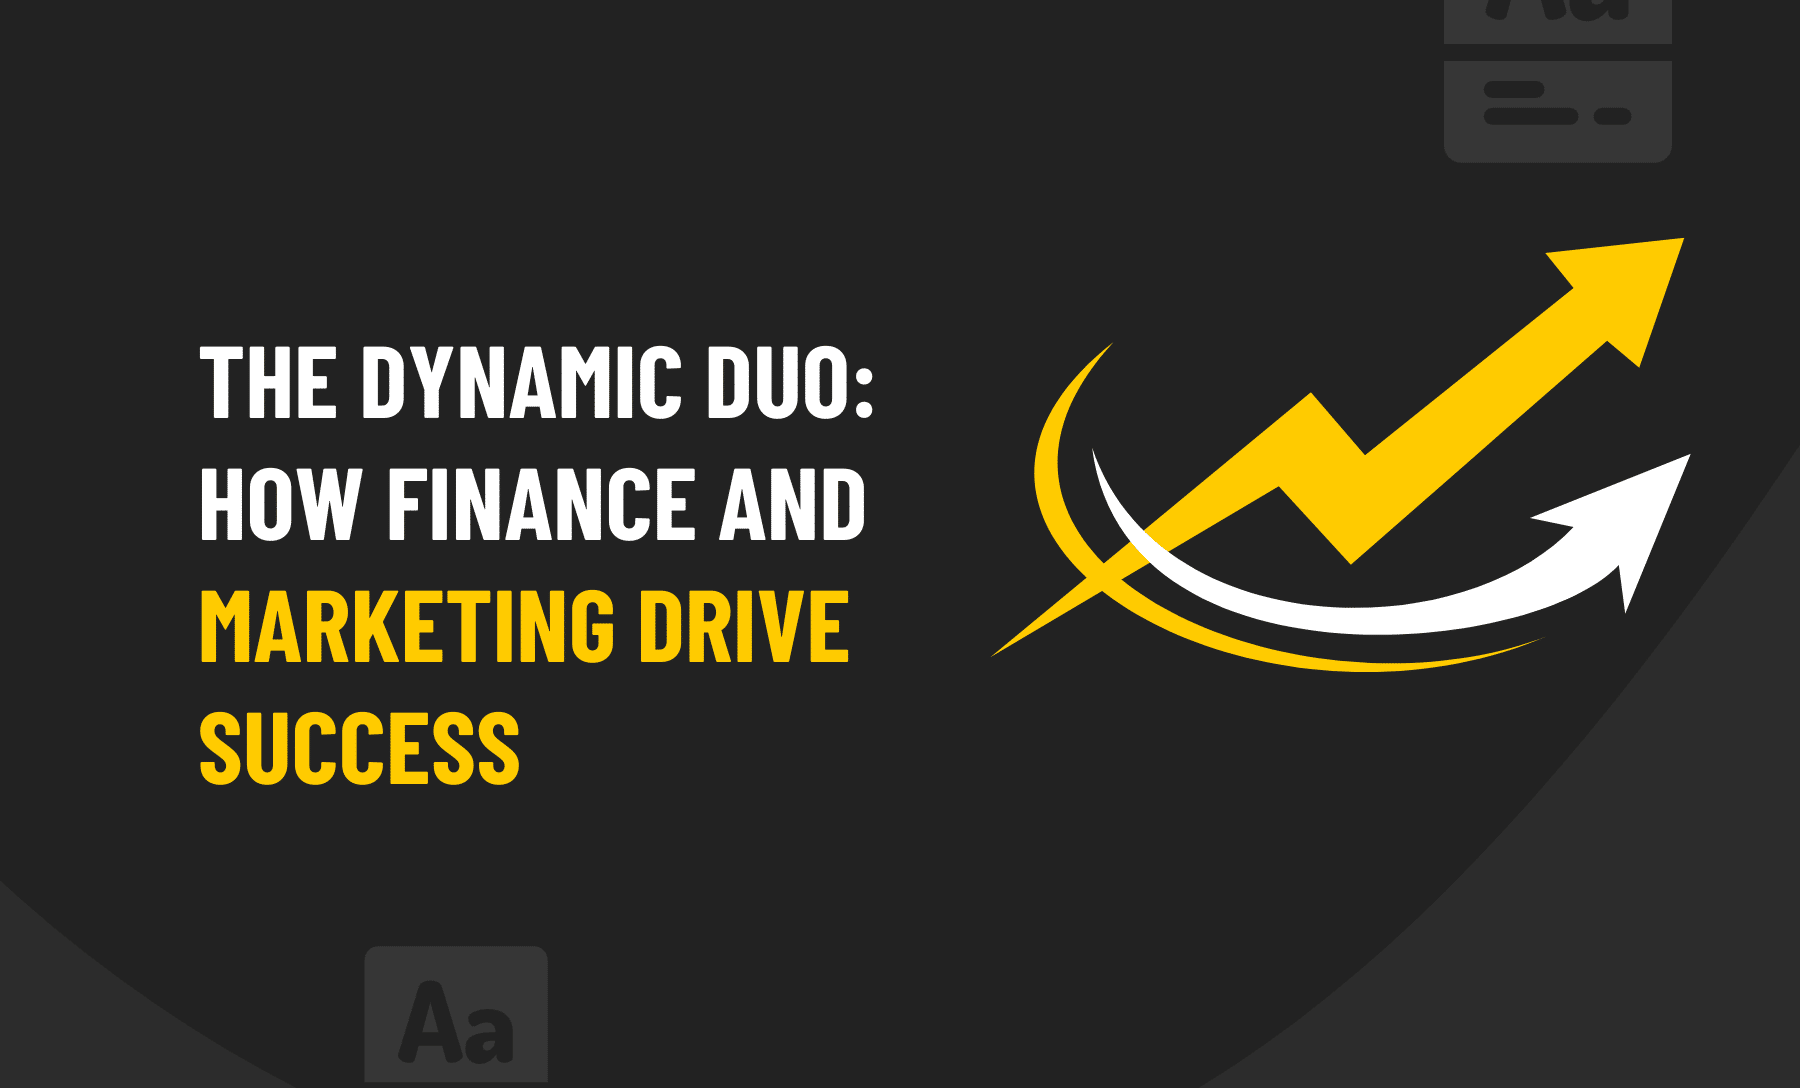 How finance and marketing drive success